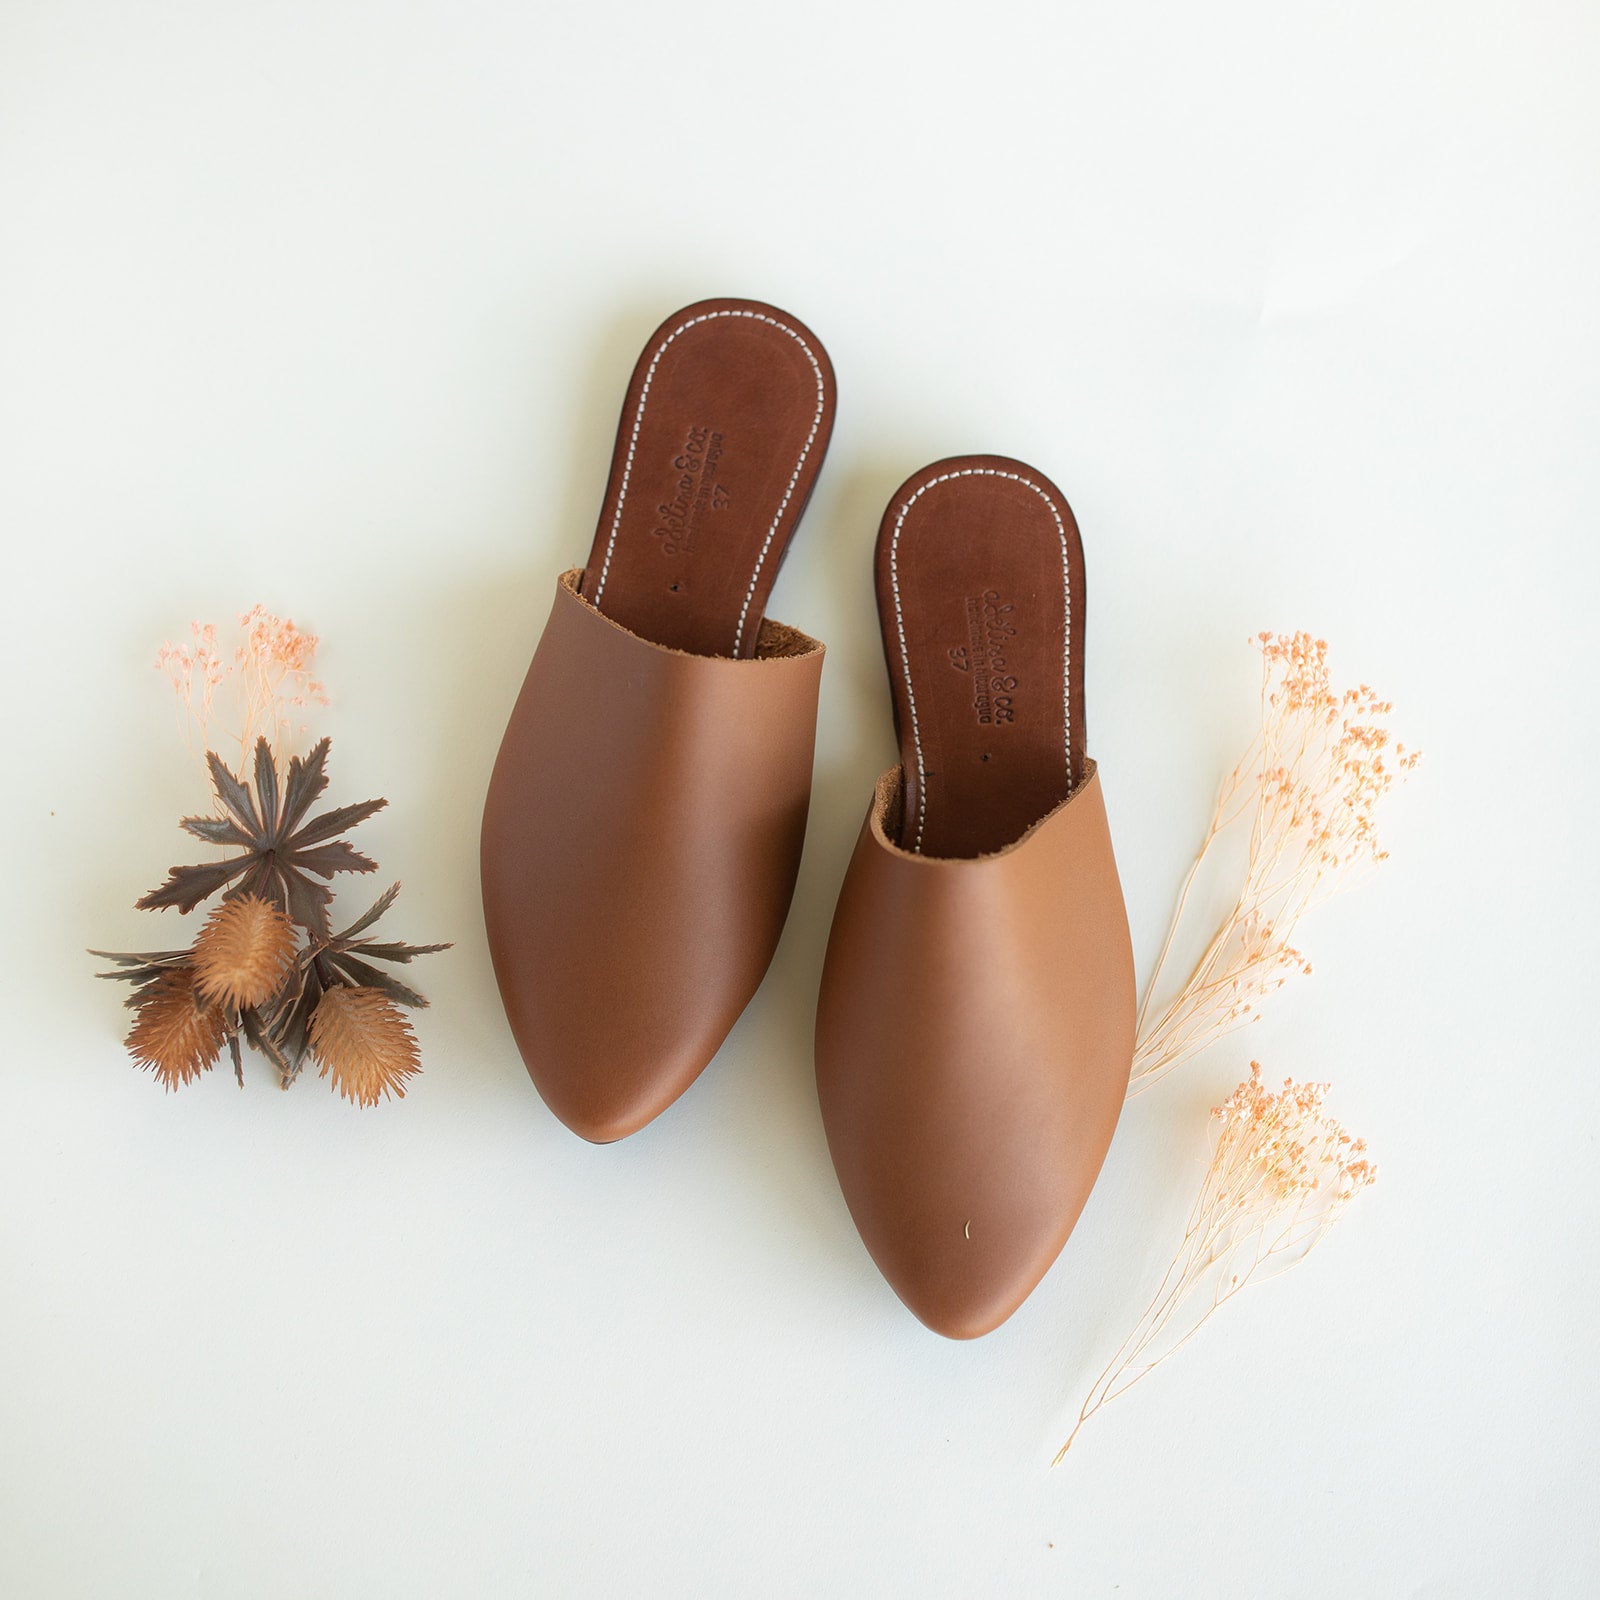 Adelisa &amp; Co leather Mule shoe for women available in black, dark brown and medium brown.